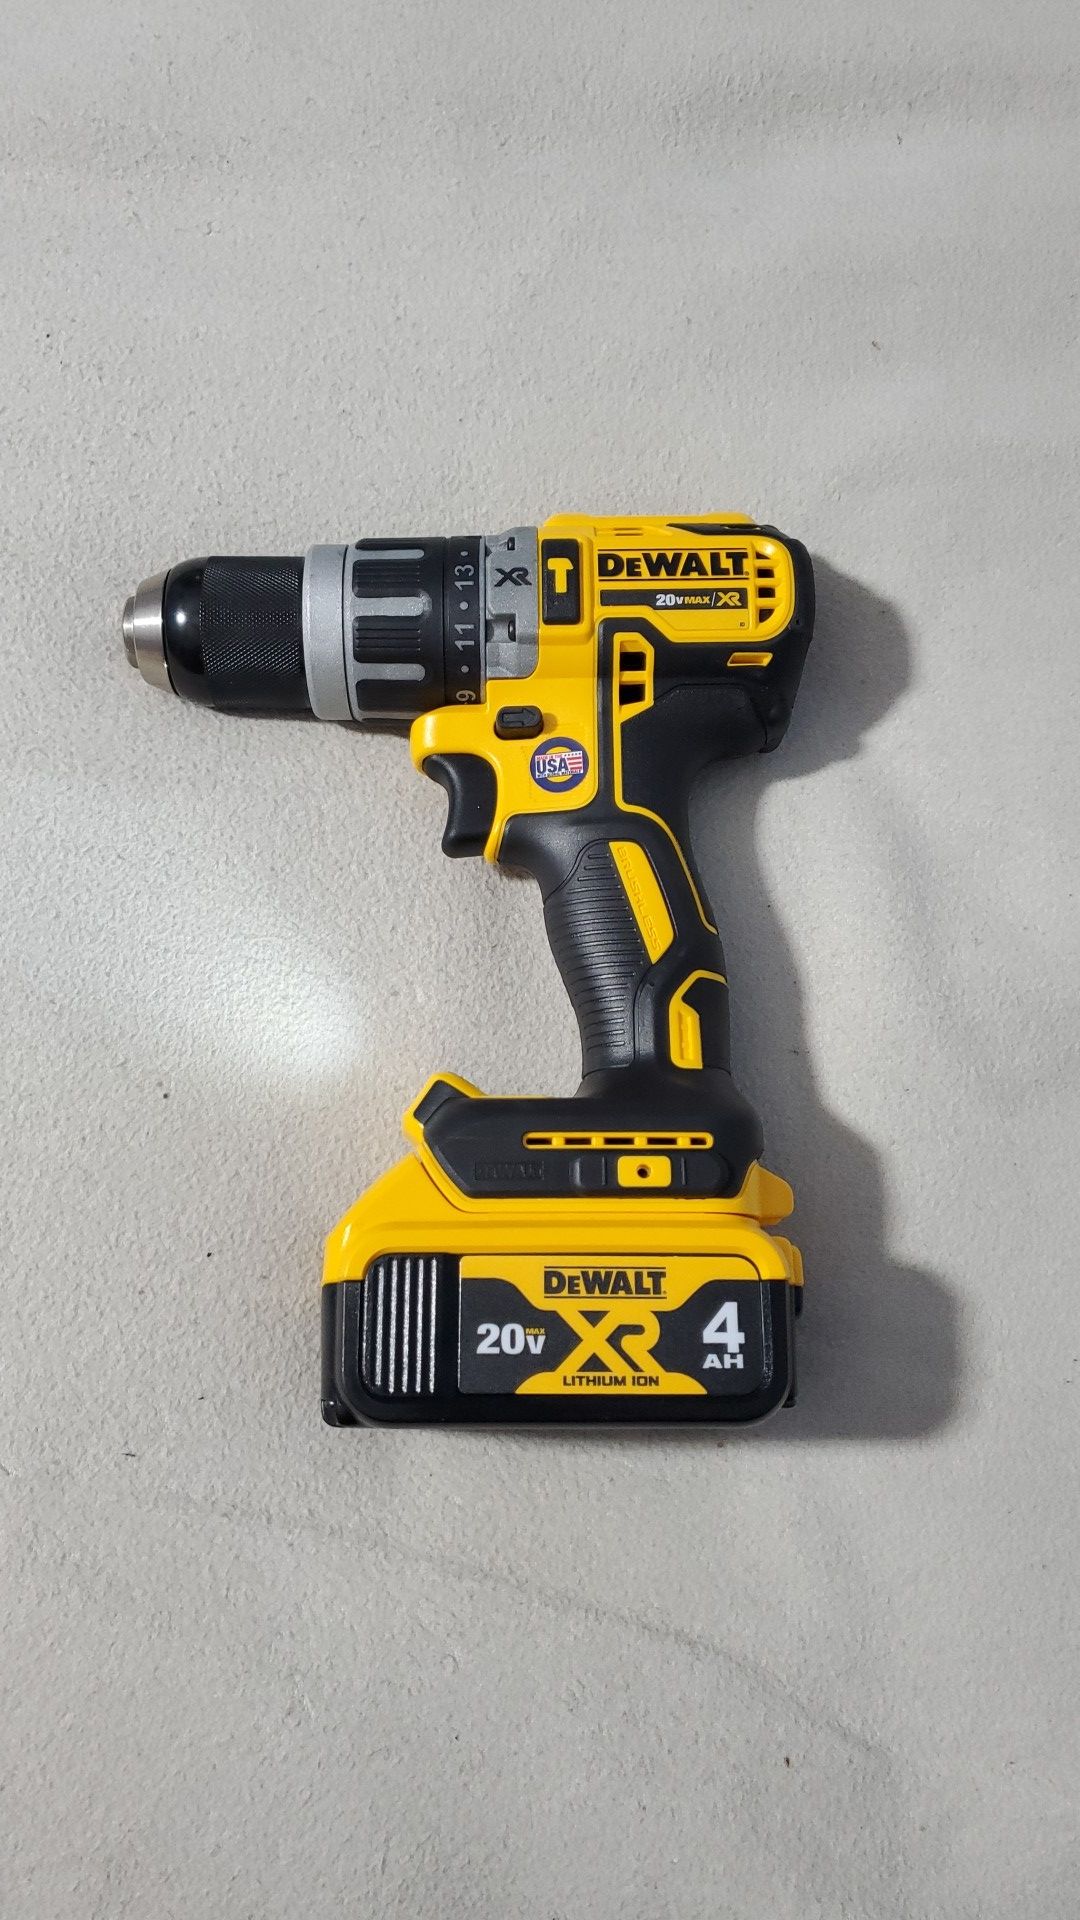 Dewalt 20V Max XR brushless 1/2in Hammer Drill Driver. Model dcd796. With new 4ah battery. Price firm